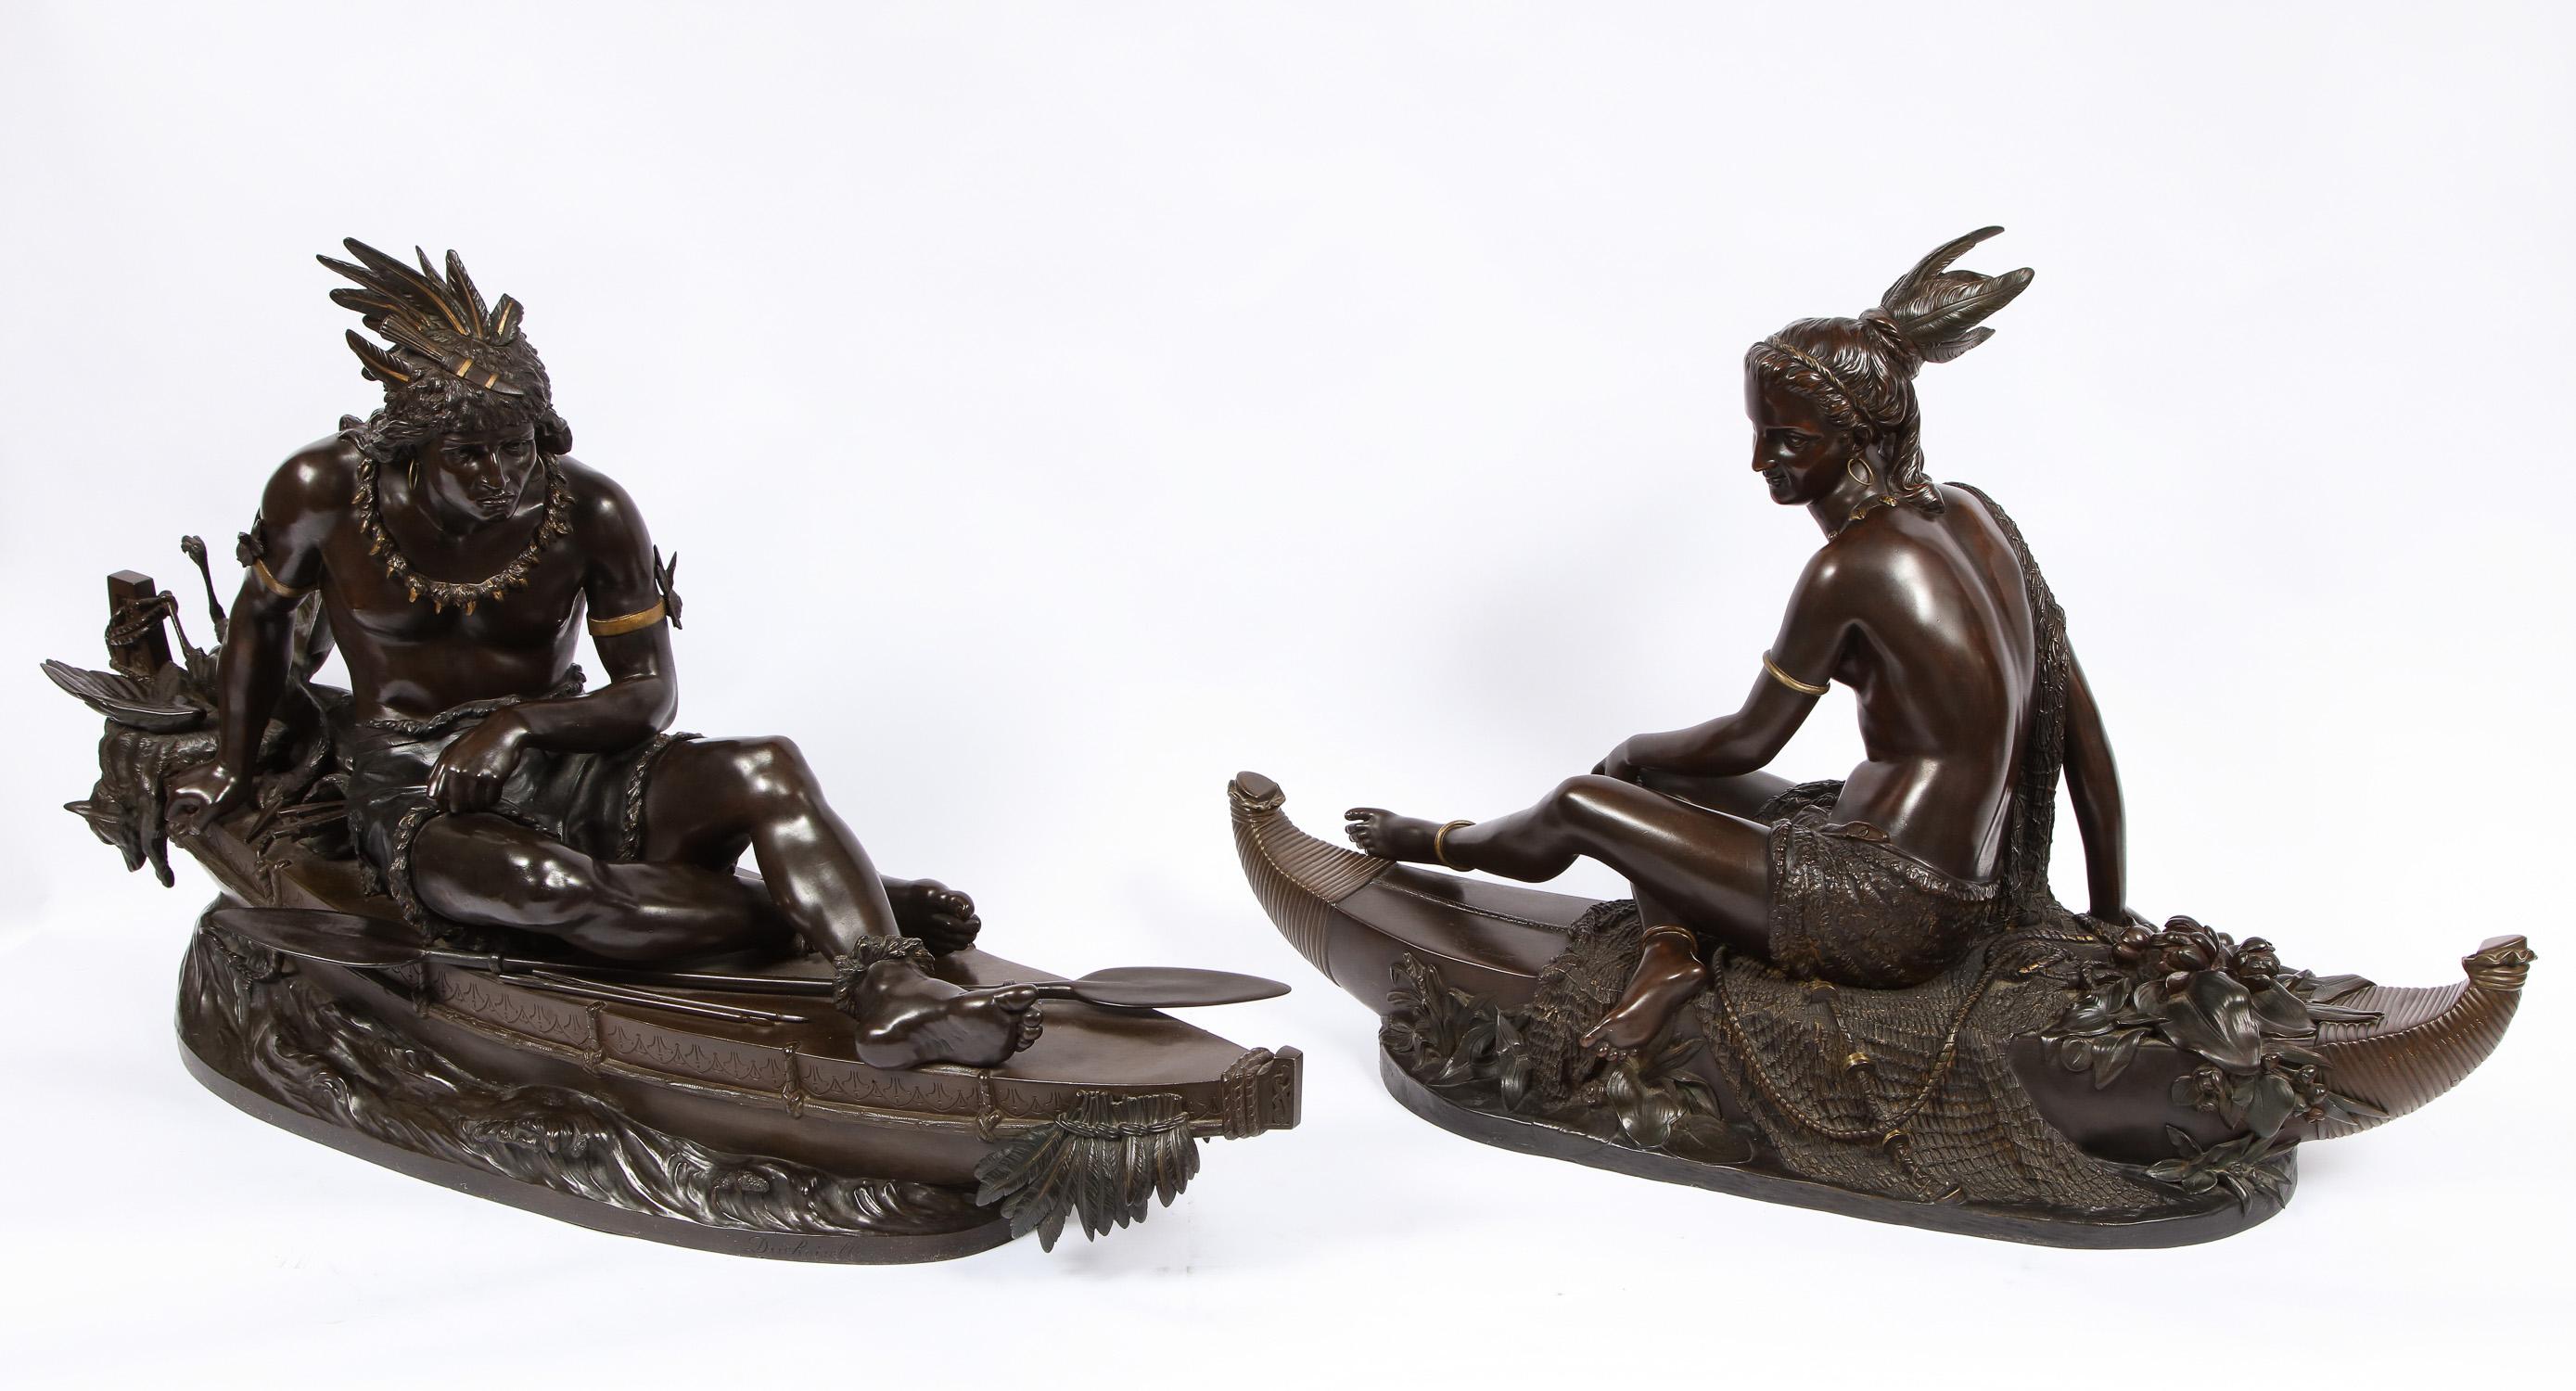 A magnificent and monumental pair of patinated bronze figures depicting native Americans, La Peche and La Chasse. Known as the 